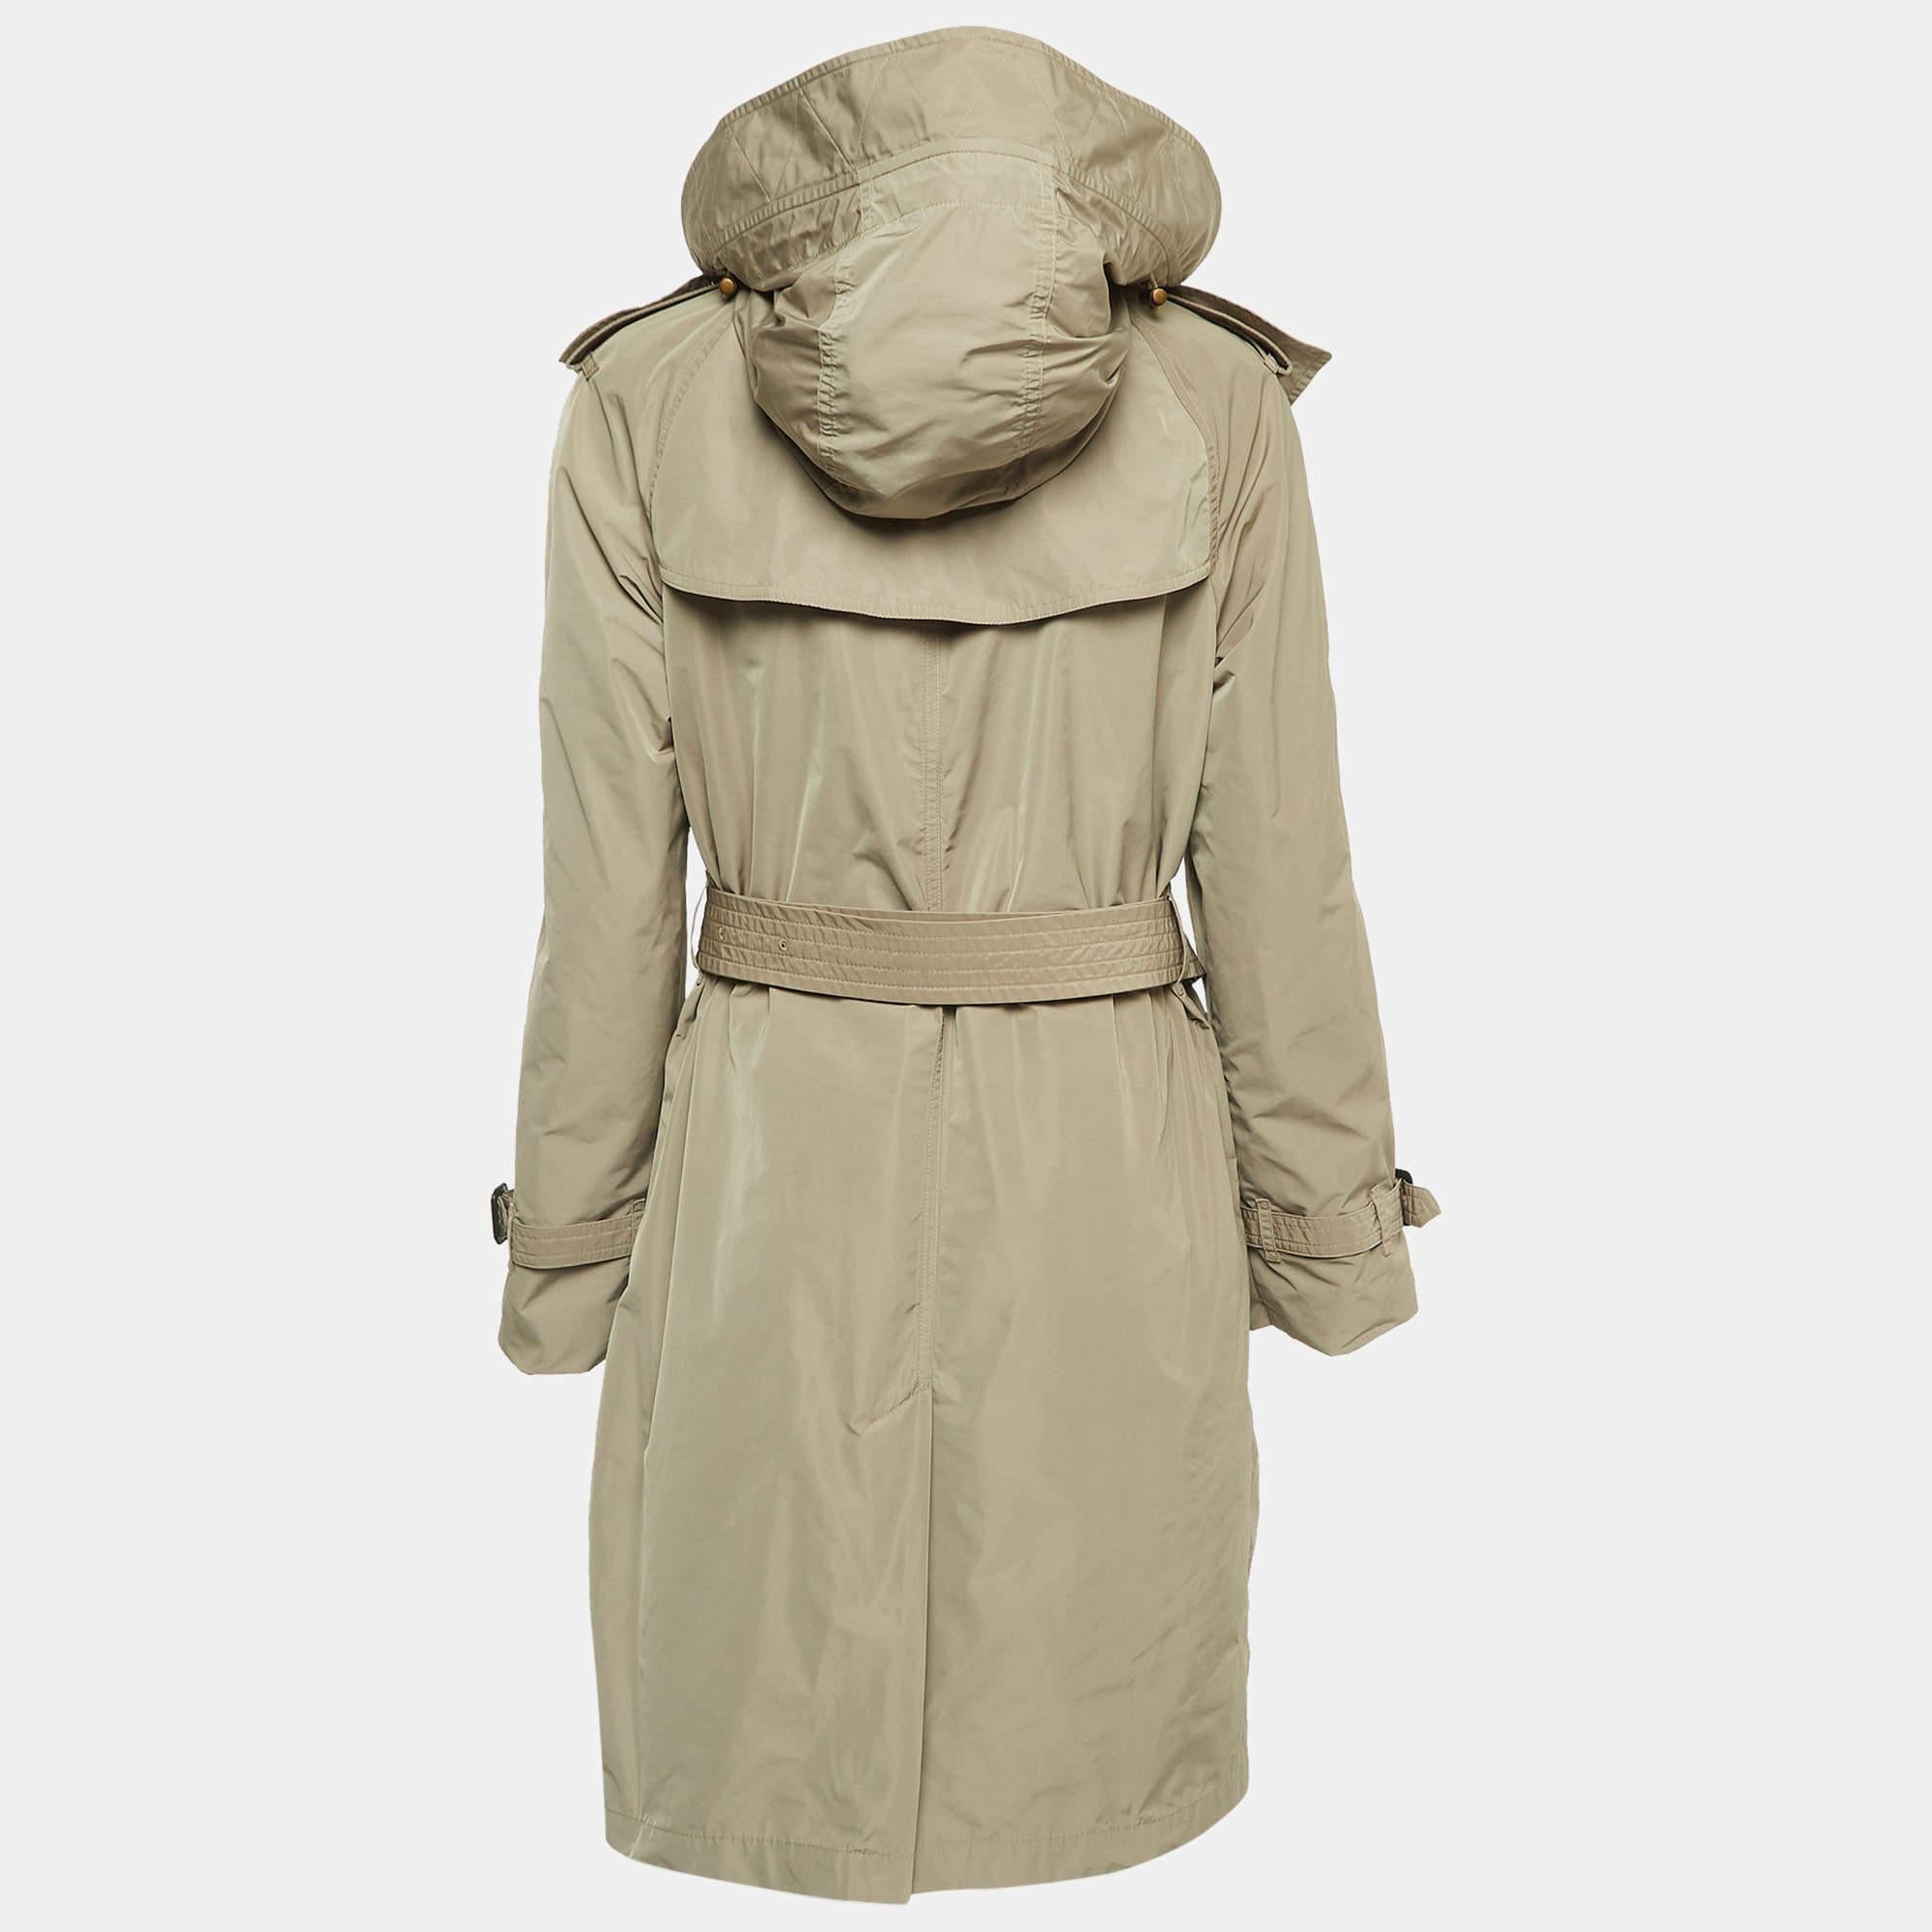 The Burberry trench coat is an iconic fashion staple. Crafted from durable fabric, it features a classic double-breasted design, signature check lining, adjustable belt, and versatile brown hue. This timeless piece combines style and functionality